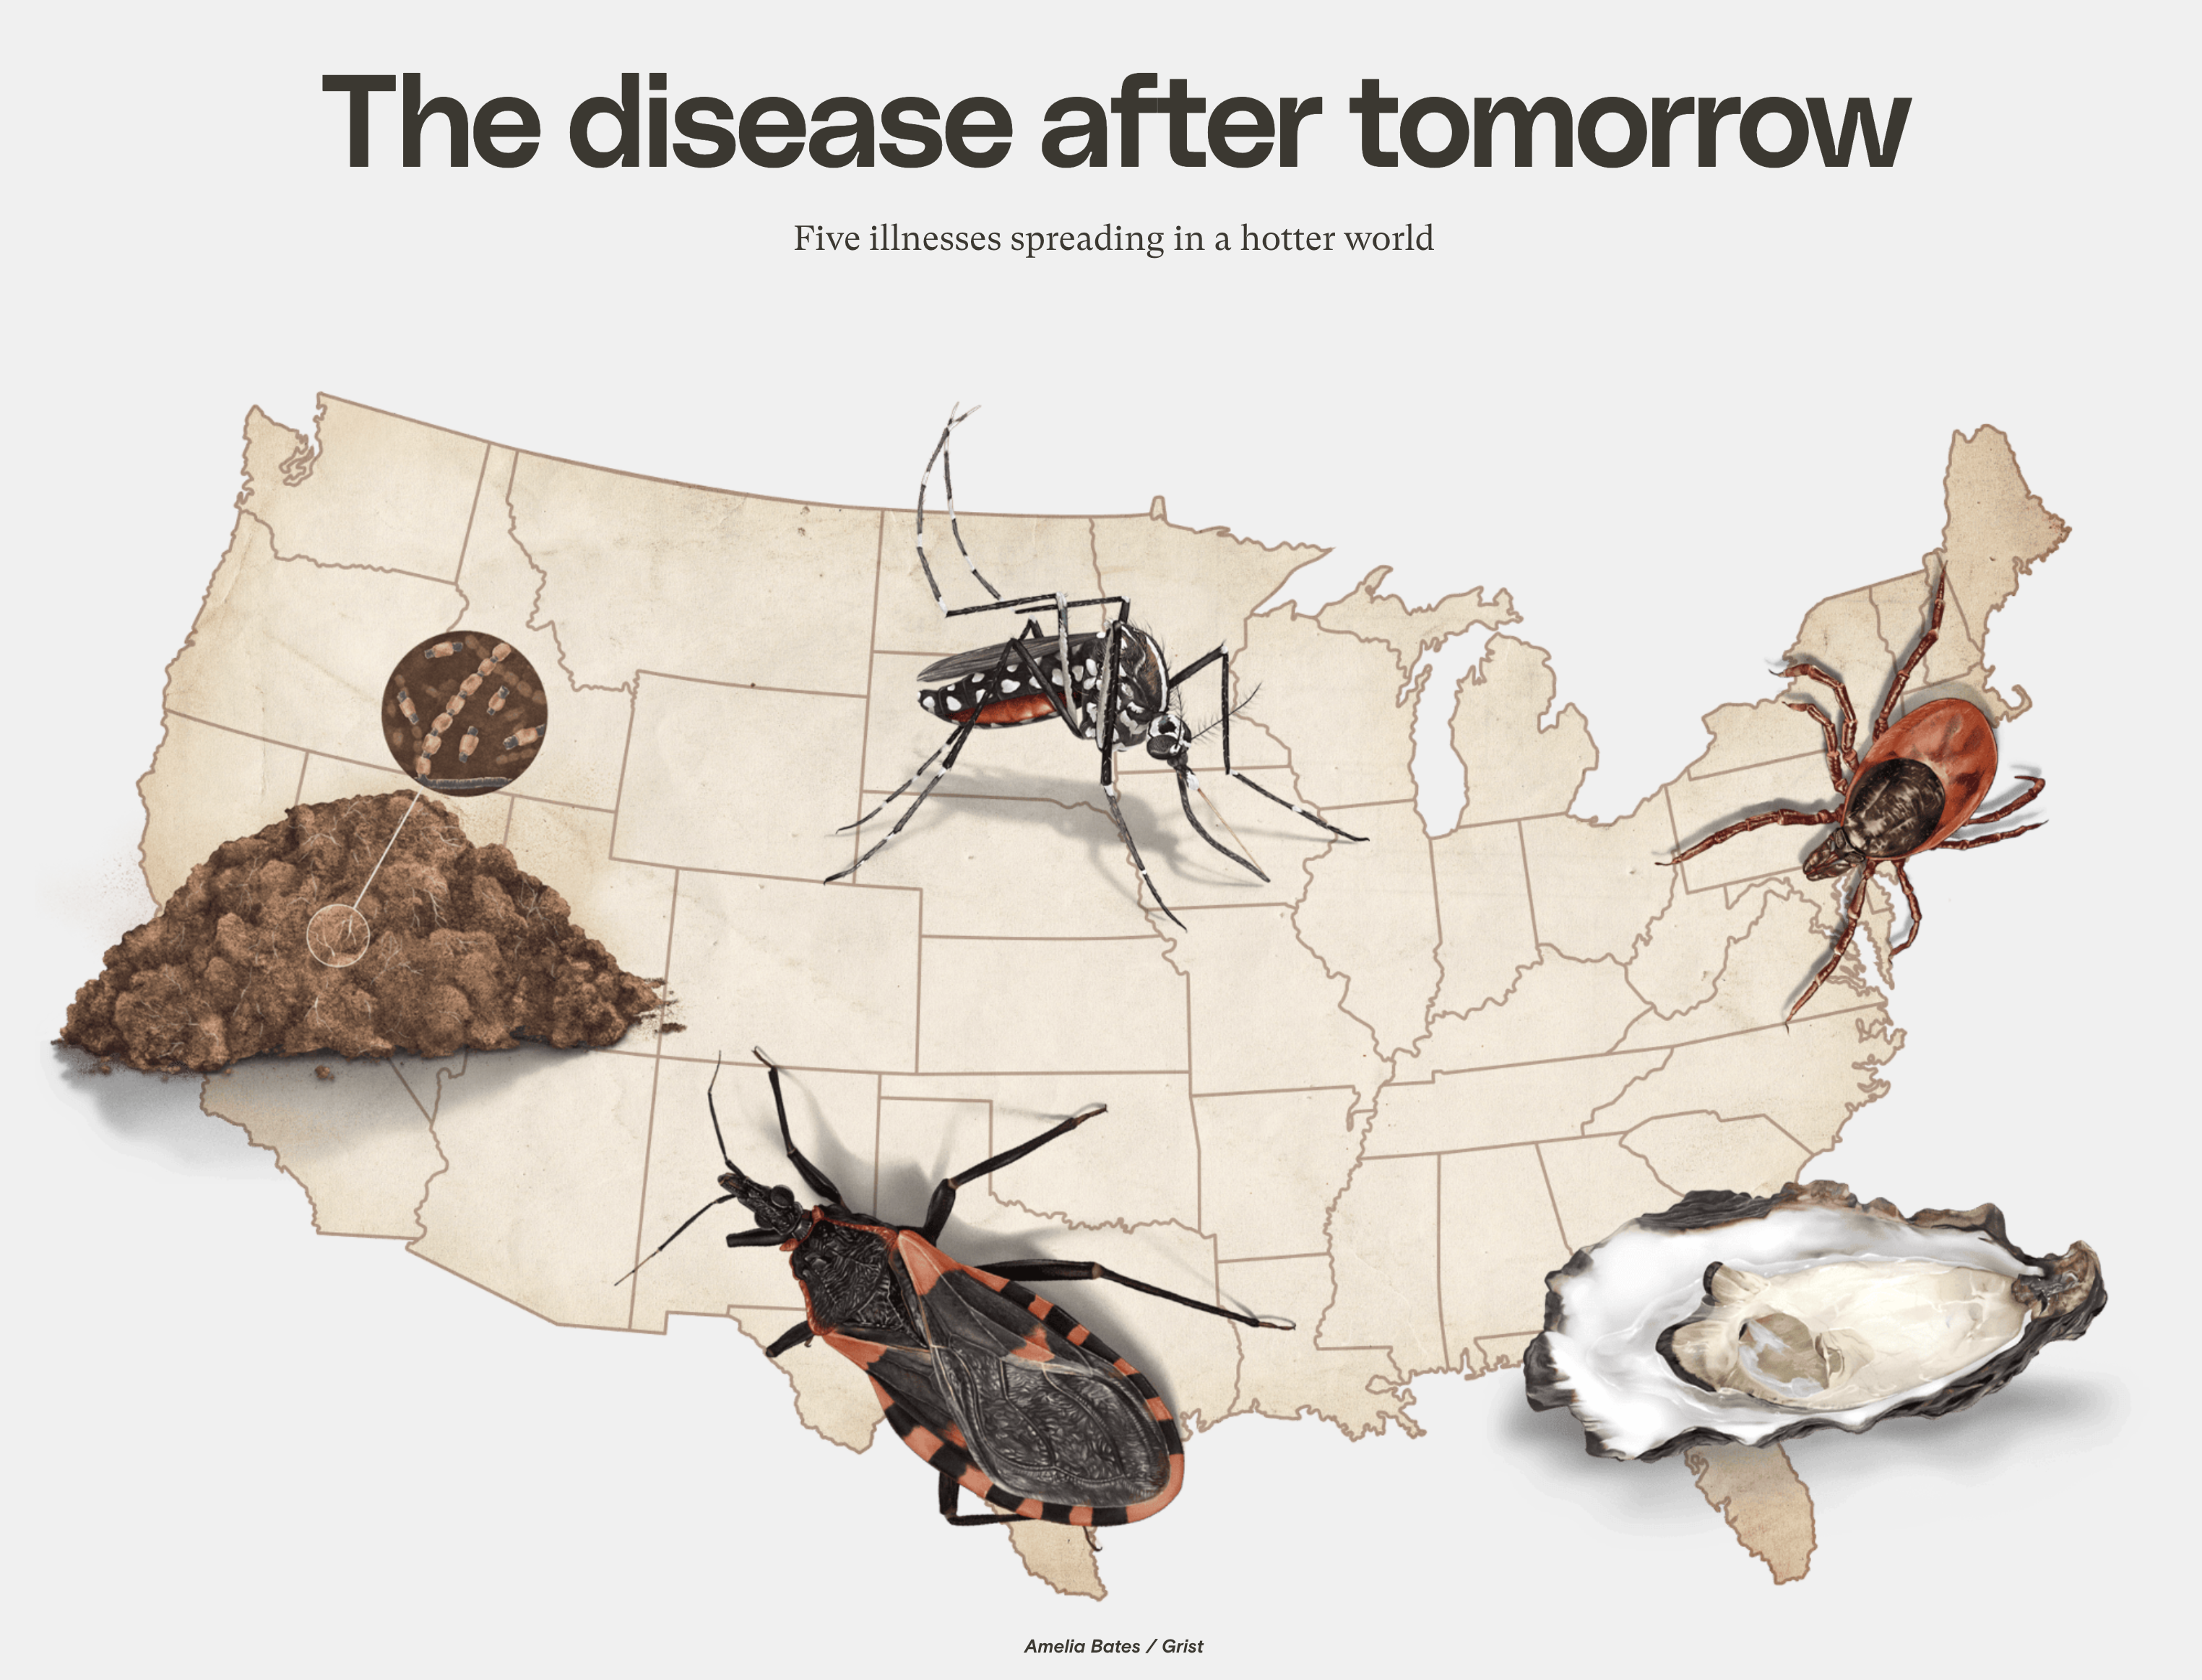 Illustration of The disease after tomorrow Five illnesses spreading in a hotter world